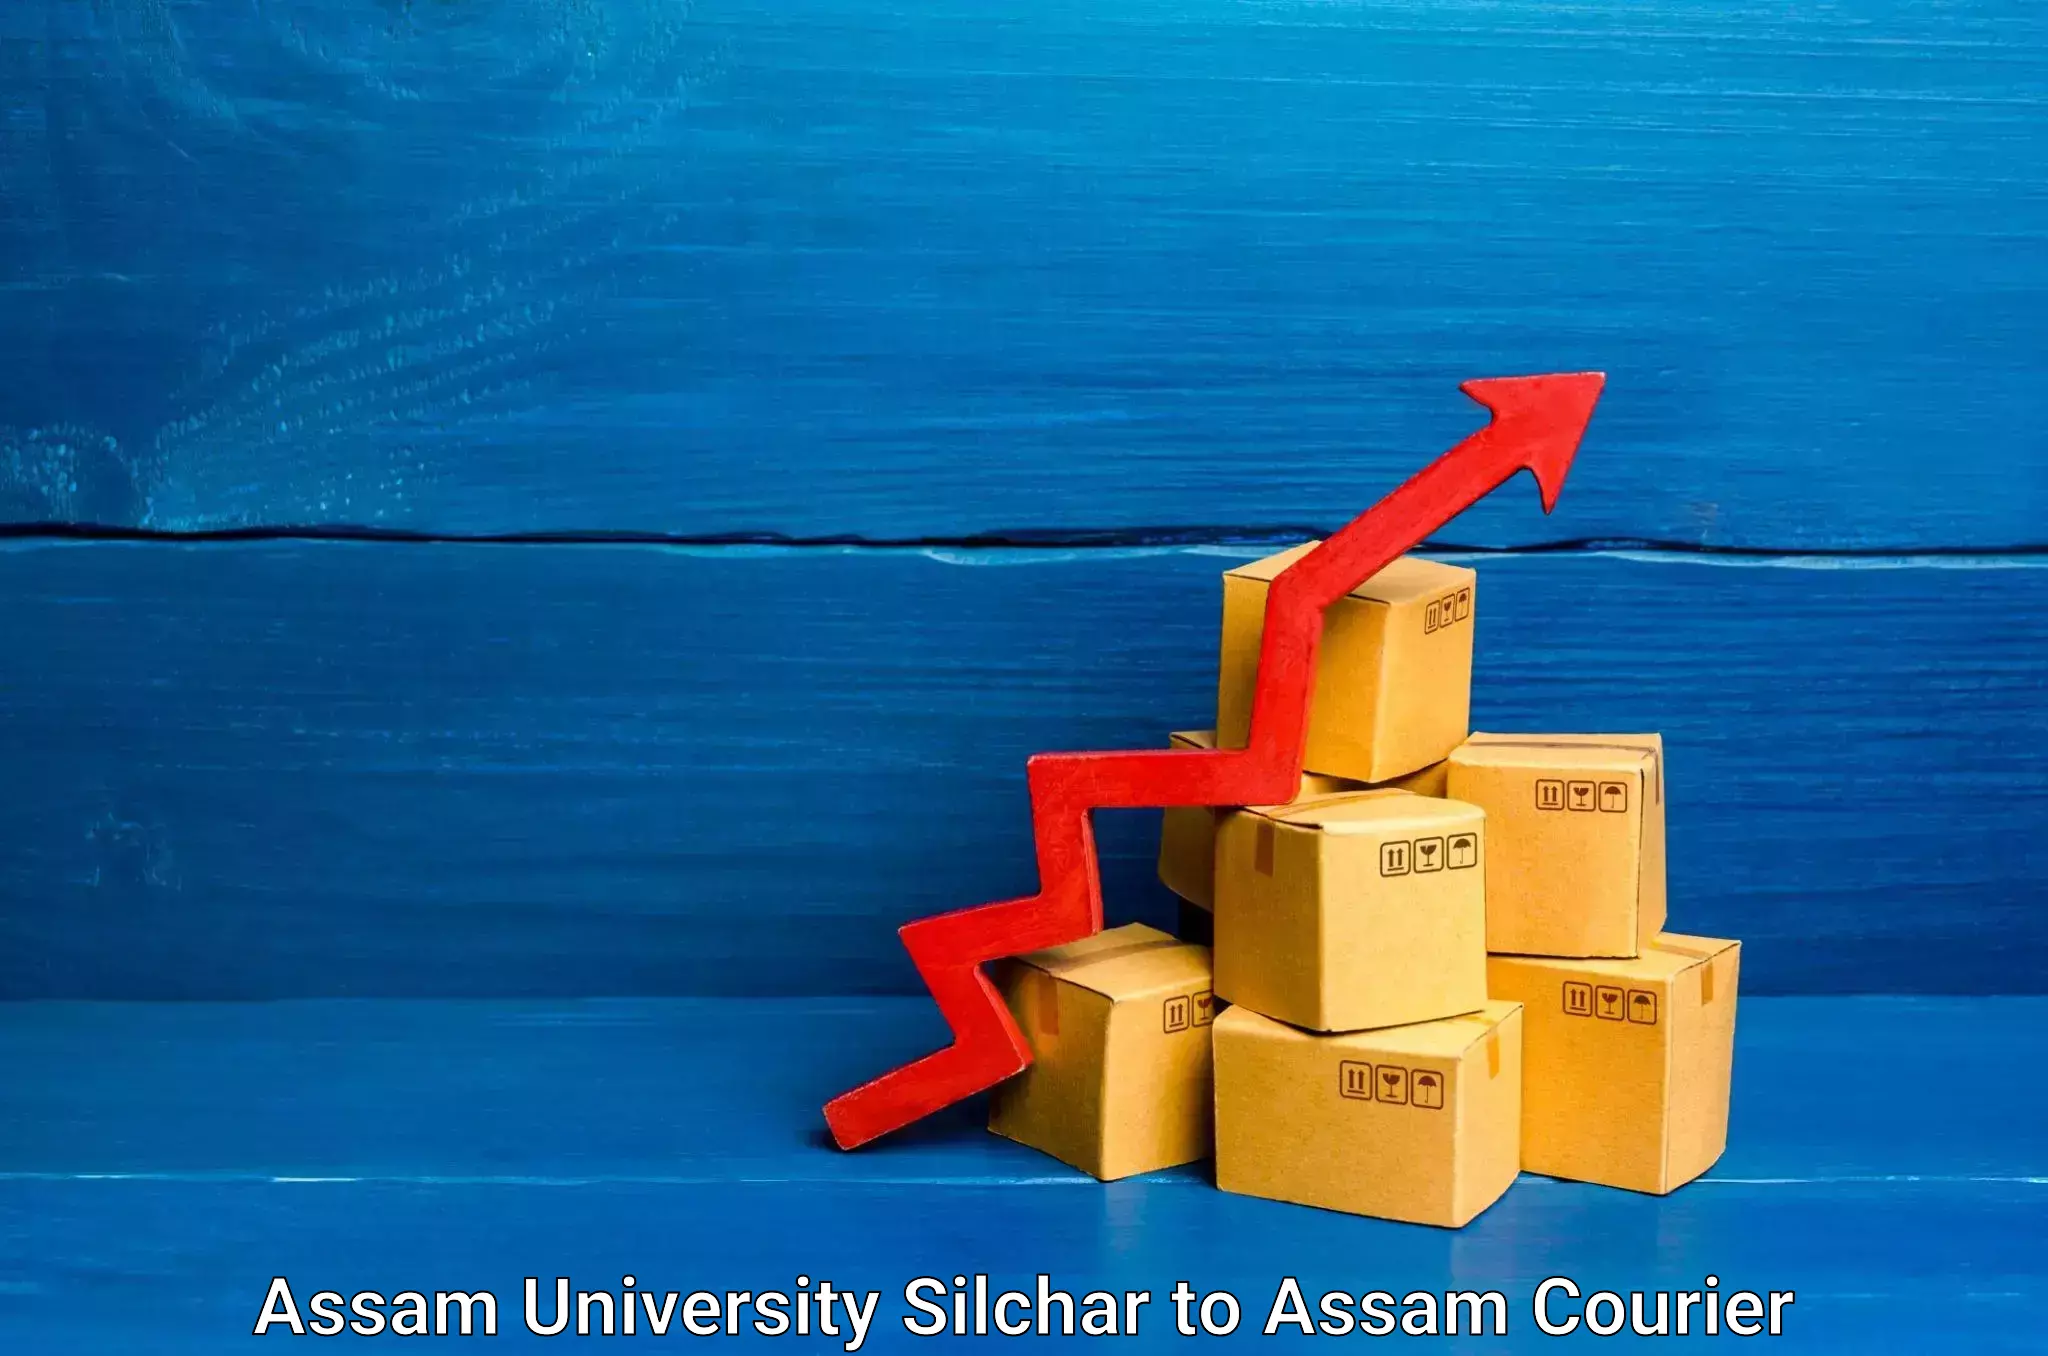 Small business couriers Assam University Silchar to Dibrugarh